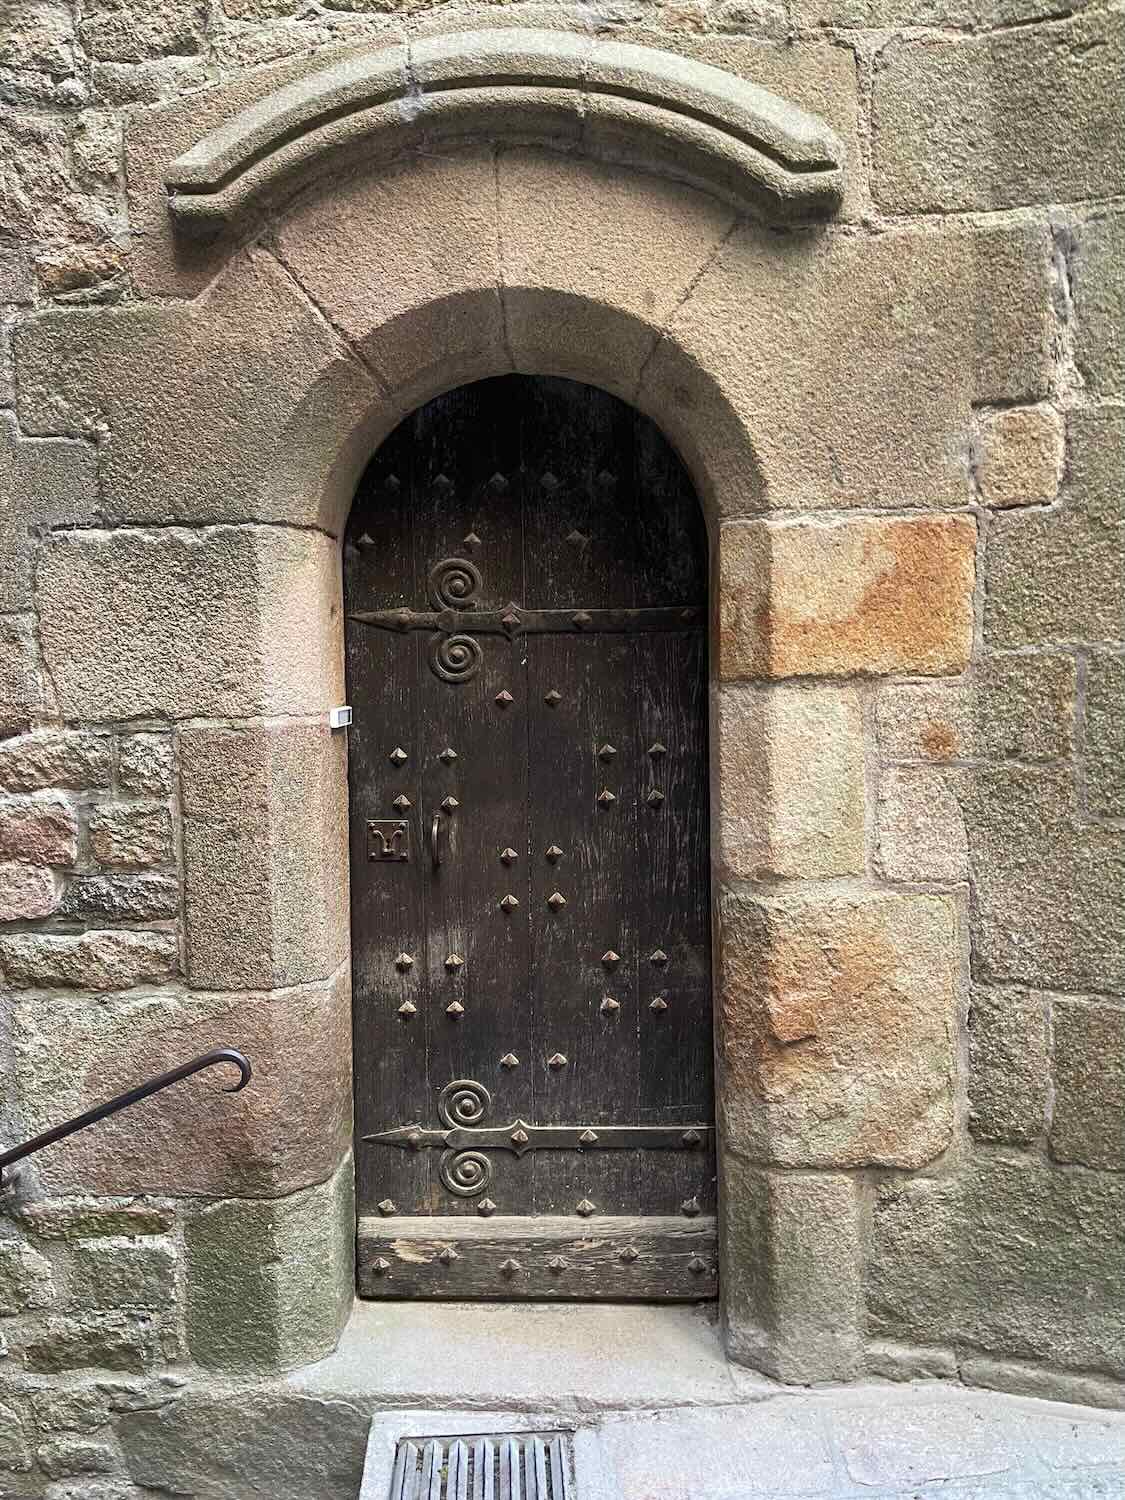 A rustic ancient wooden door set in a stone archway, featuring intricate iron details and studs, at Mont Saint-Michel.